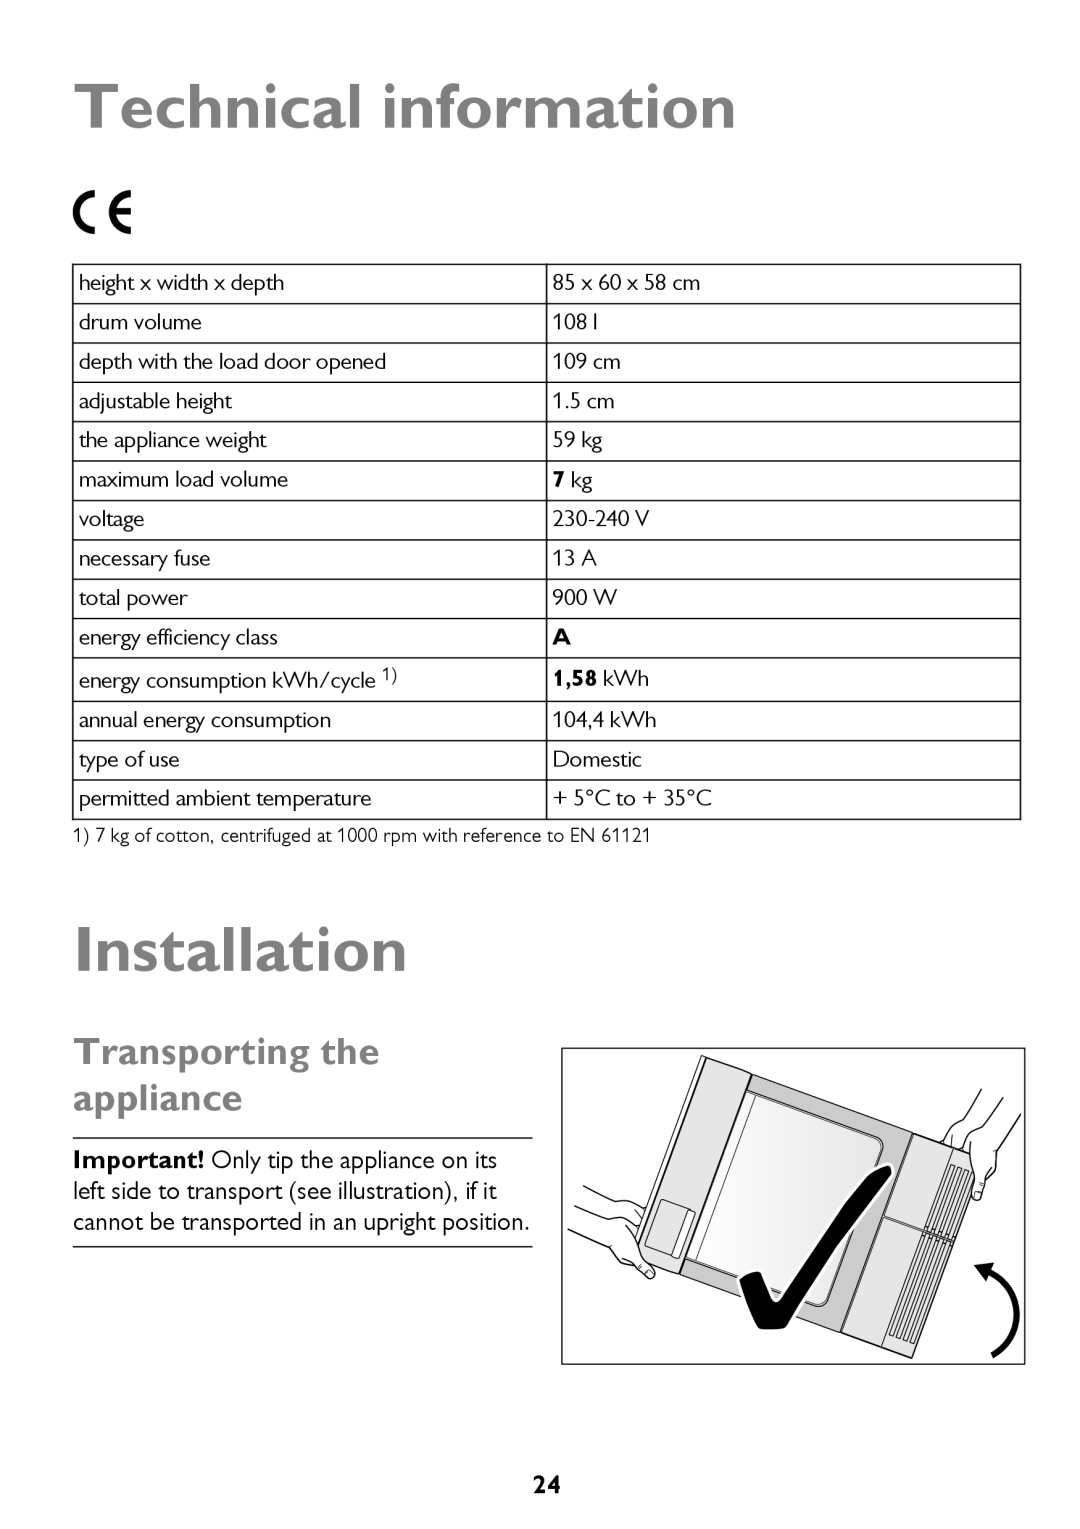 John Lewis JLTDH15 instruction manual Technical information, Installation, Transporting the appliance, 7 kg, 1,58 kWh 